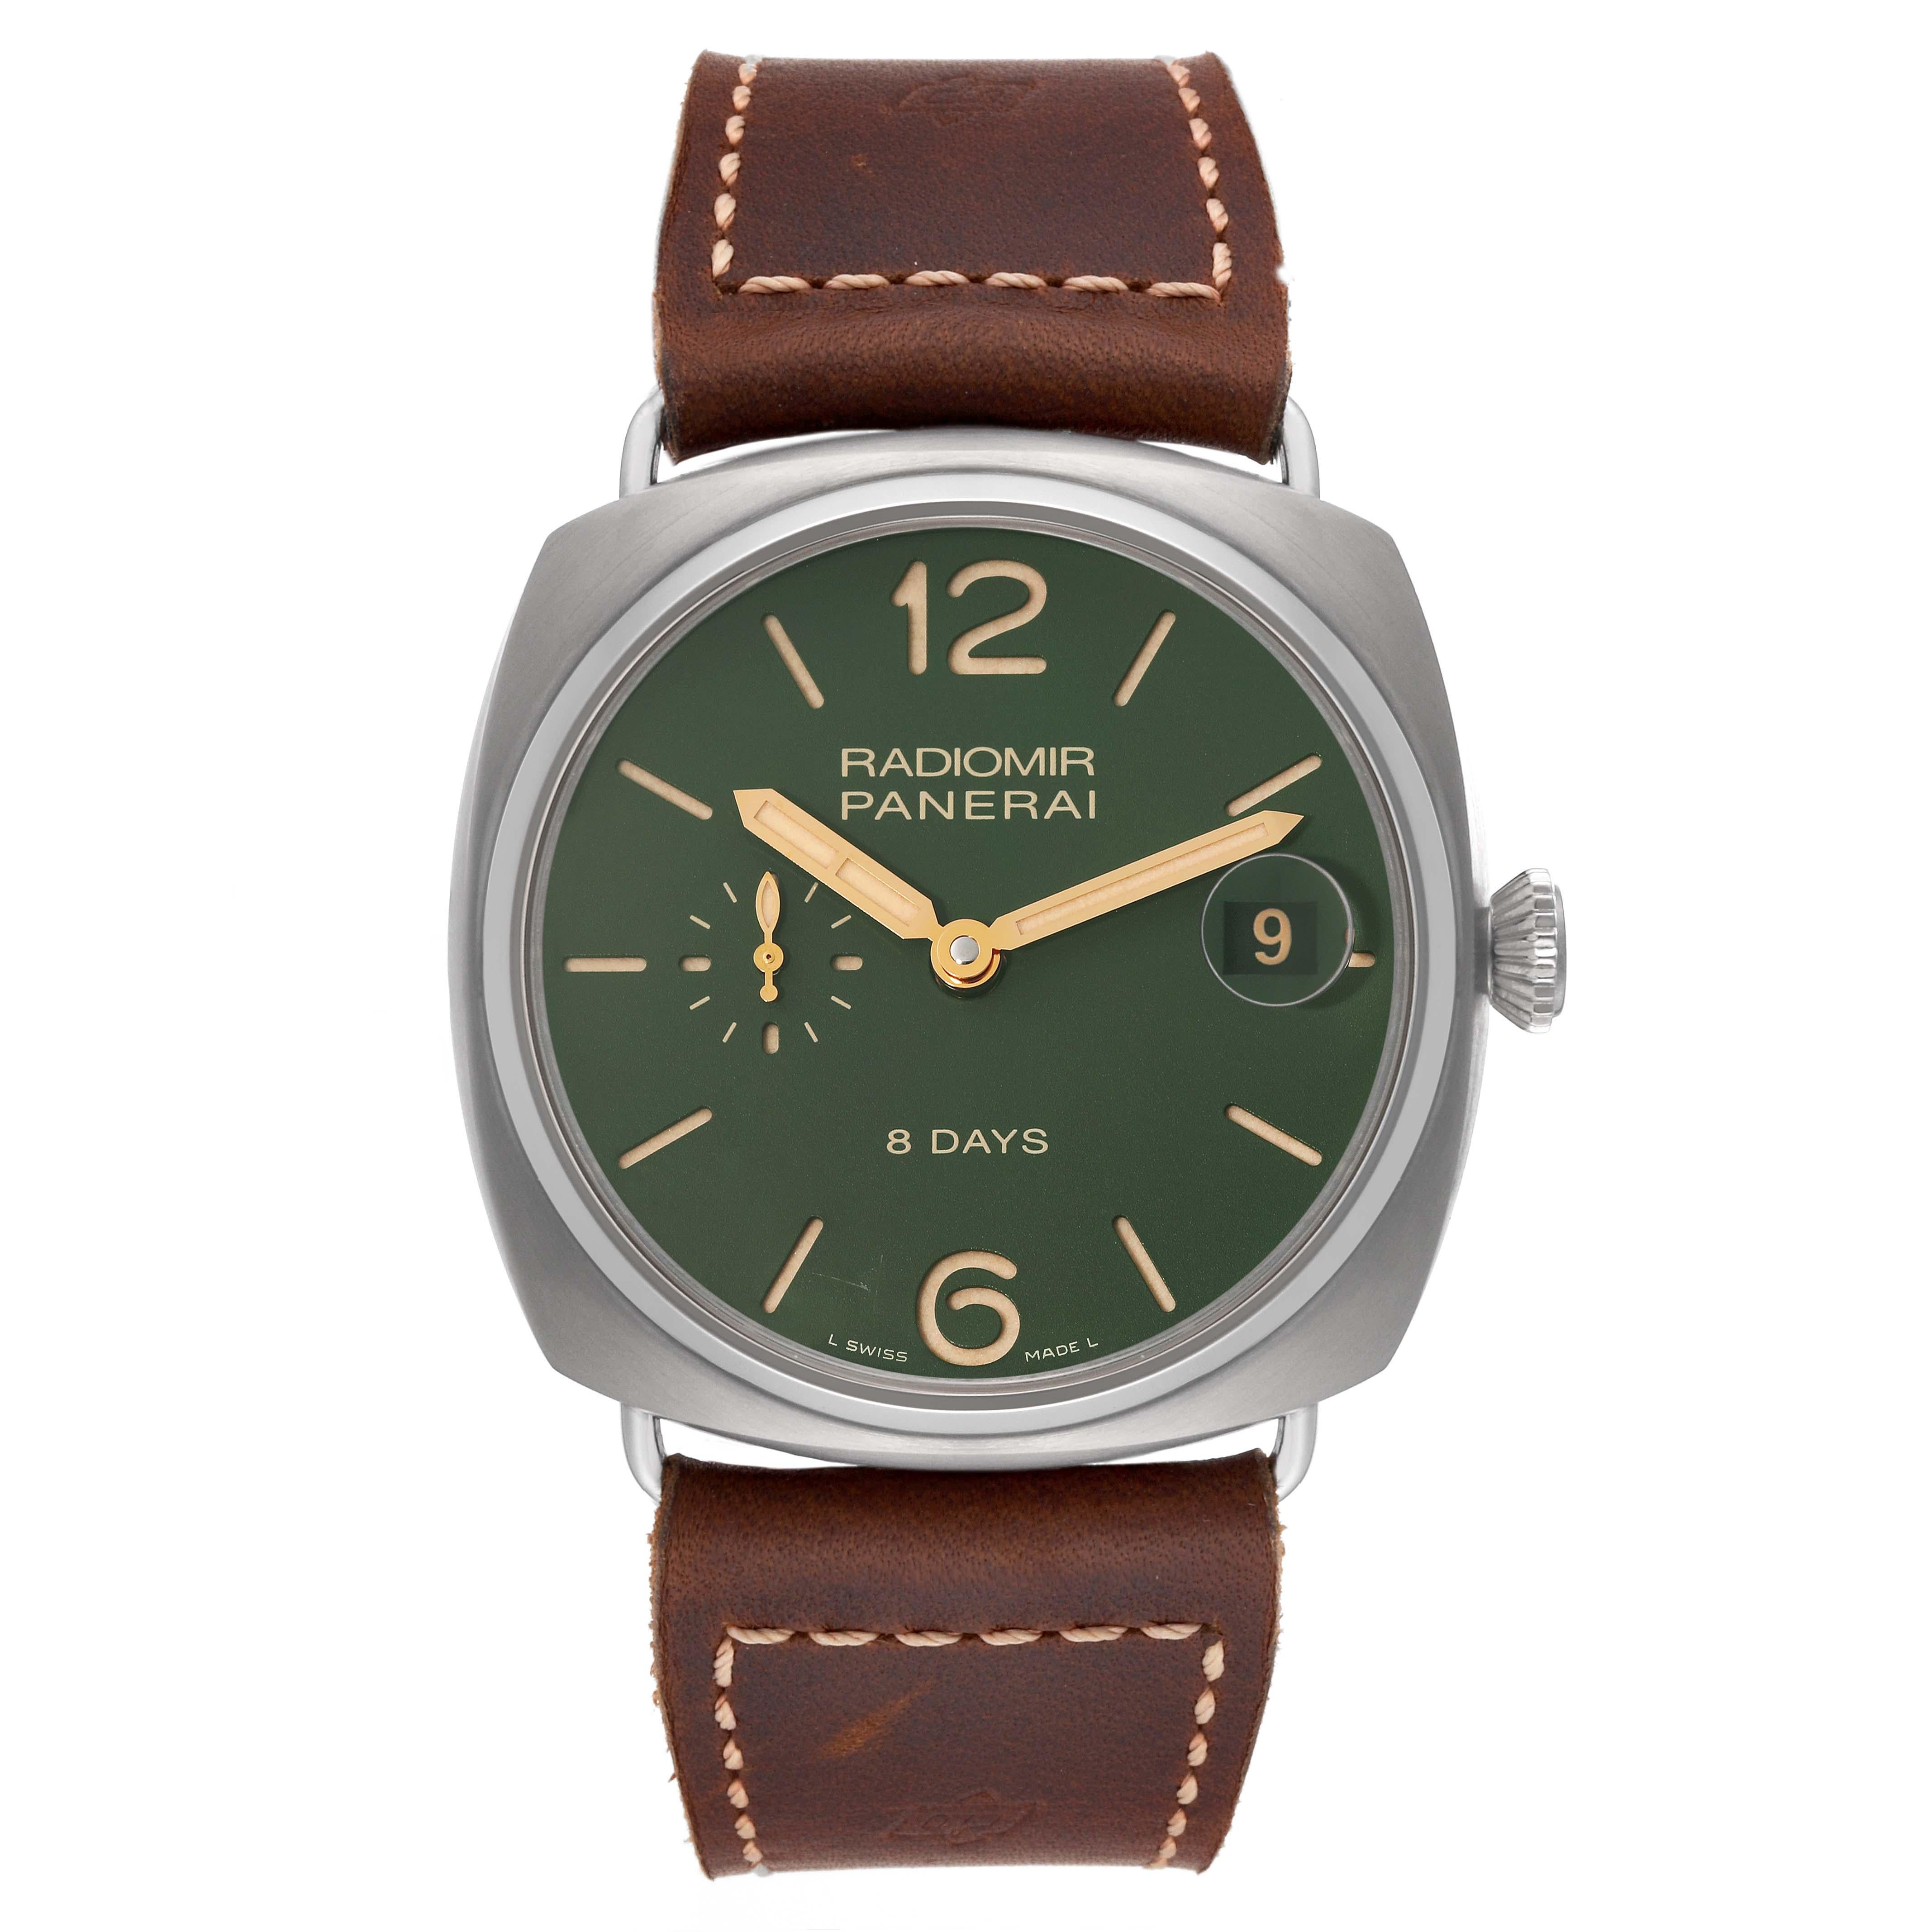 Panerai Radiomir 8 Days Green Dial Titanium Mens Watch PAM00735 Box Papers. Manual winding movement. Two part cushion shaped titanium case 45.0 mm in diameter. Case thickness 15.6 mm. Transparent exhibition sapphire crystal caseback. Titanium sloped